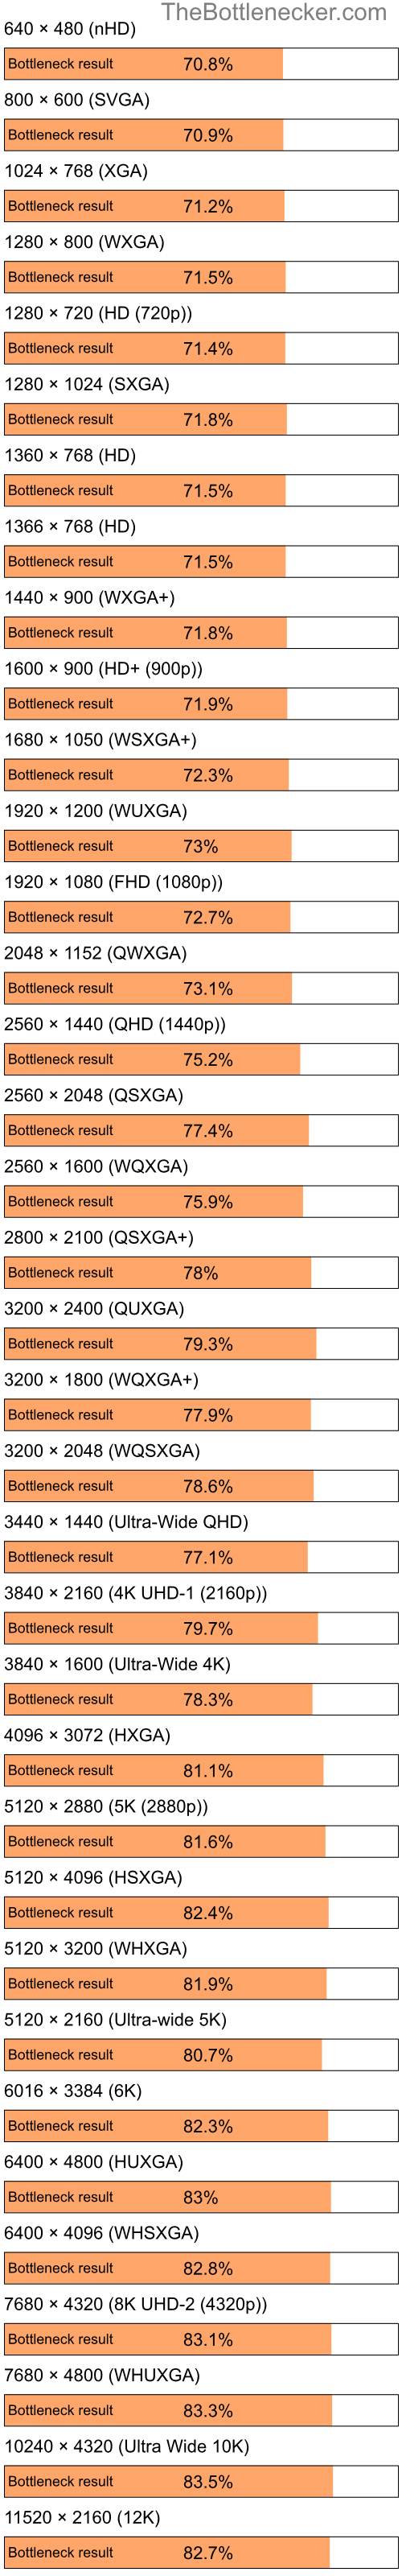 Bottleneck results by resolution for Intel Celeron and NVIDIA GeForce G205M in Graphic Card Intense Tasks